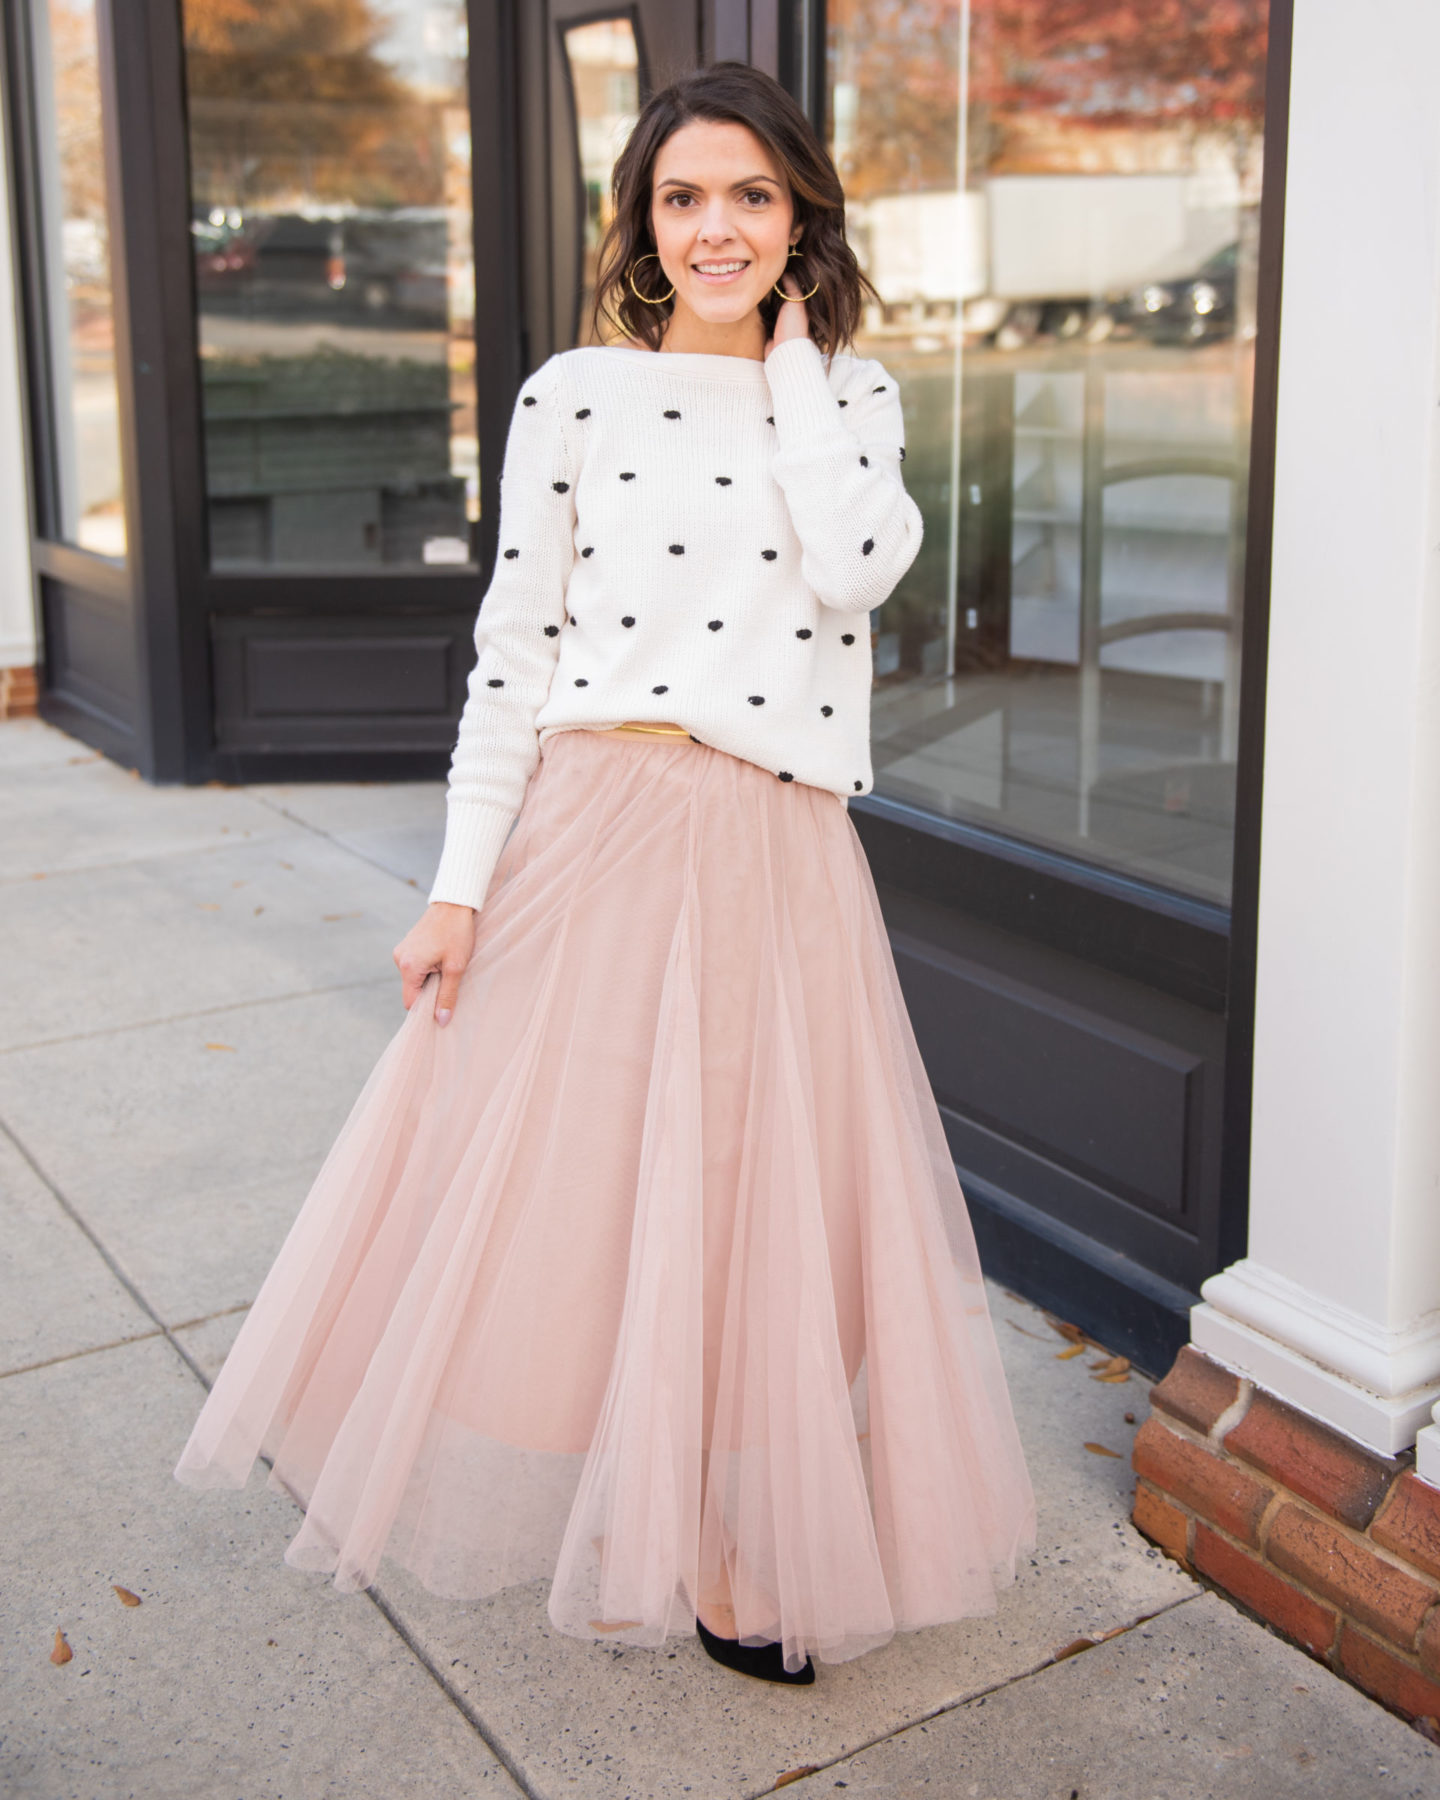 3 Ways To Style A Tulle Skirt The Sarah Stories 4276